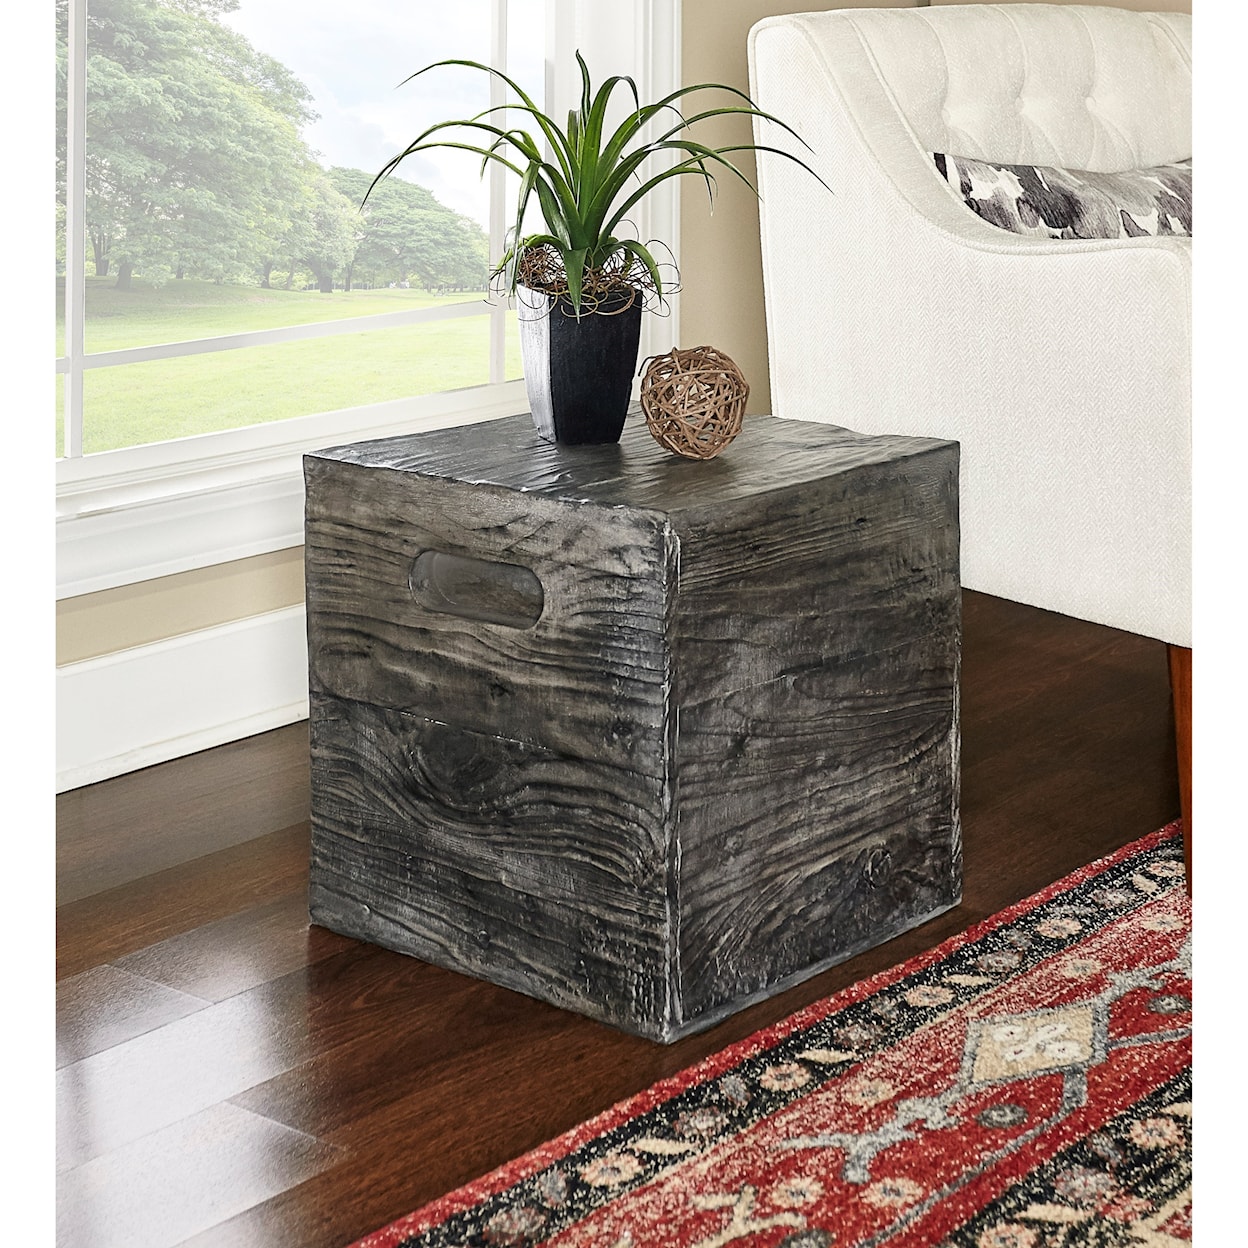 Powell Warner Crate End Table